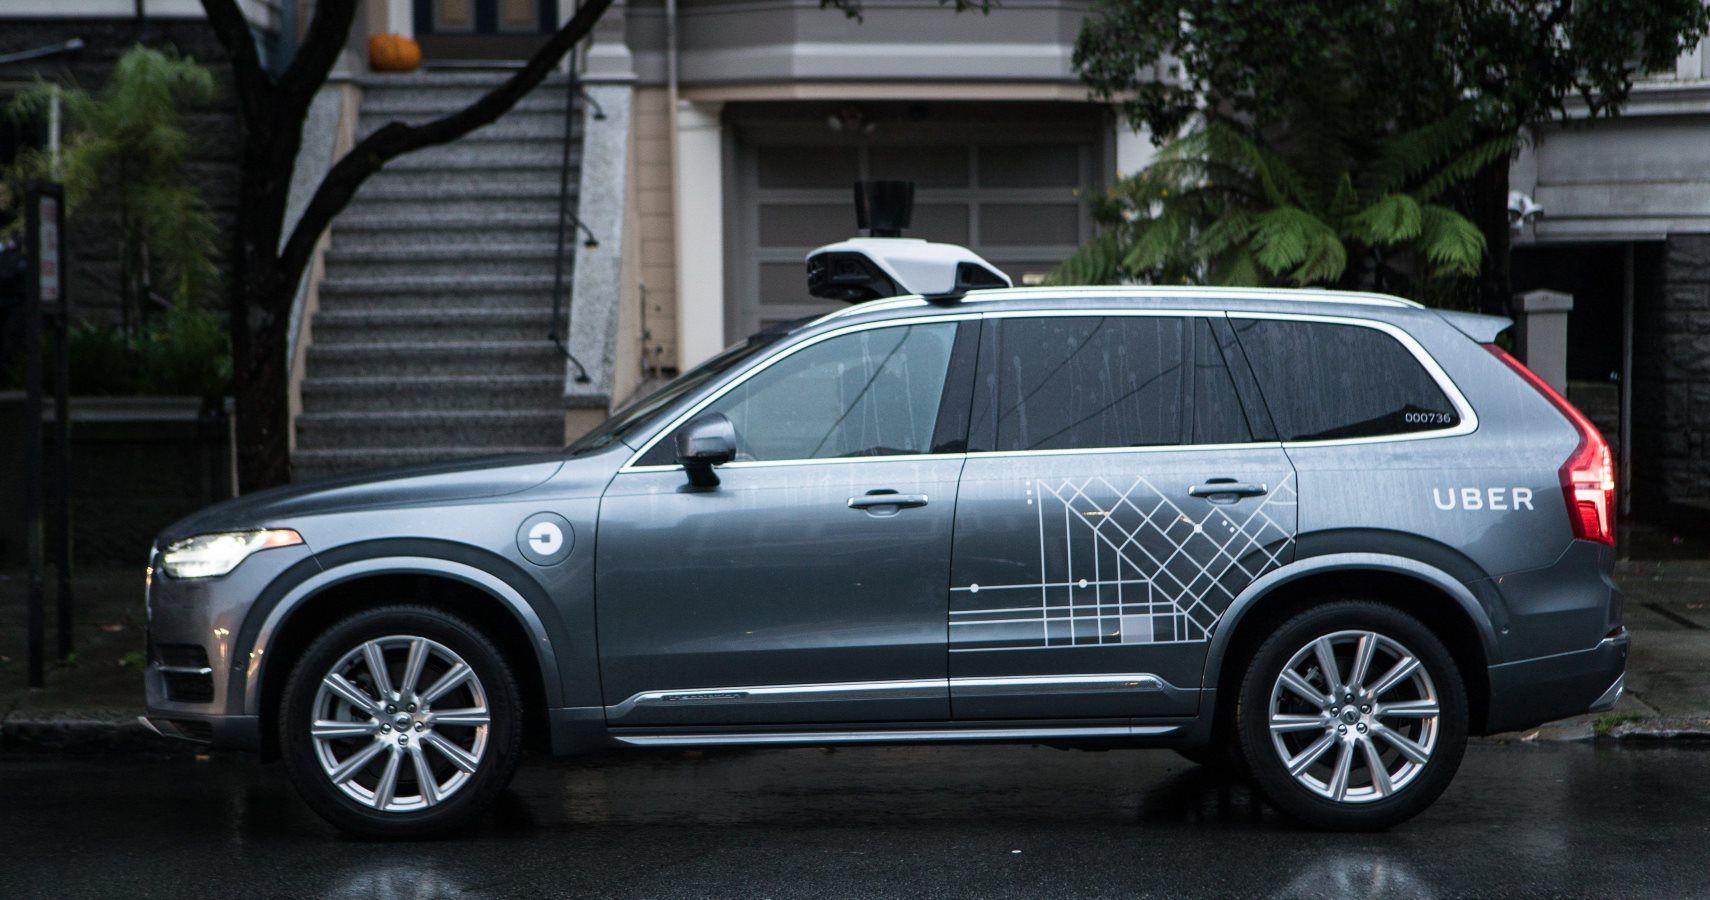 Uber's Autonomous Test Cars Disabled Volvo Safety Systems